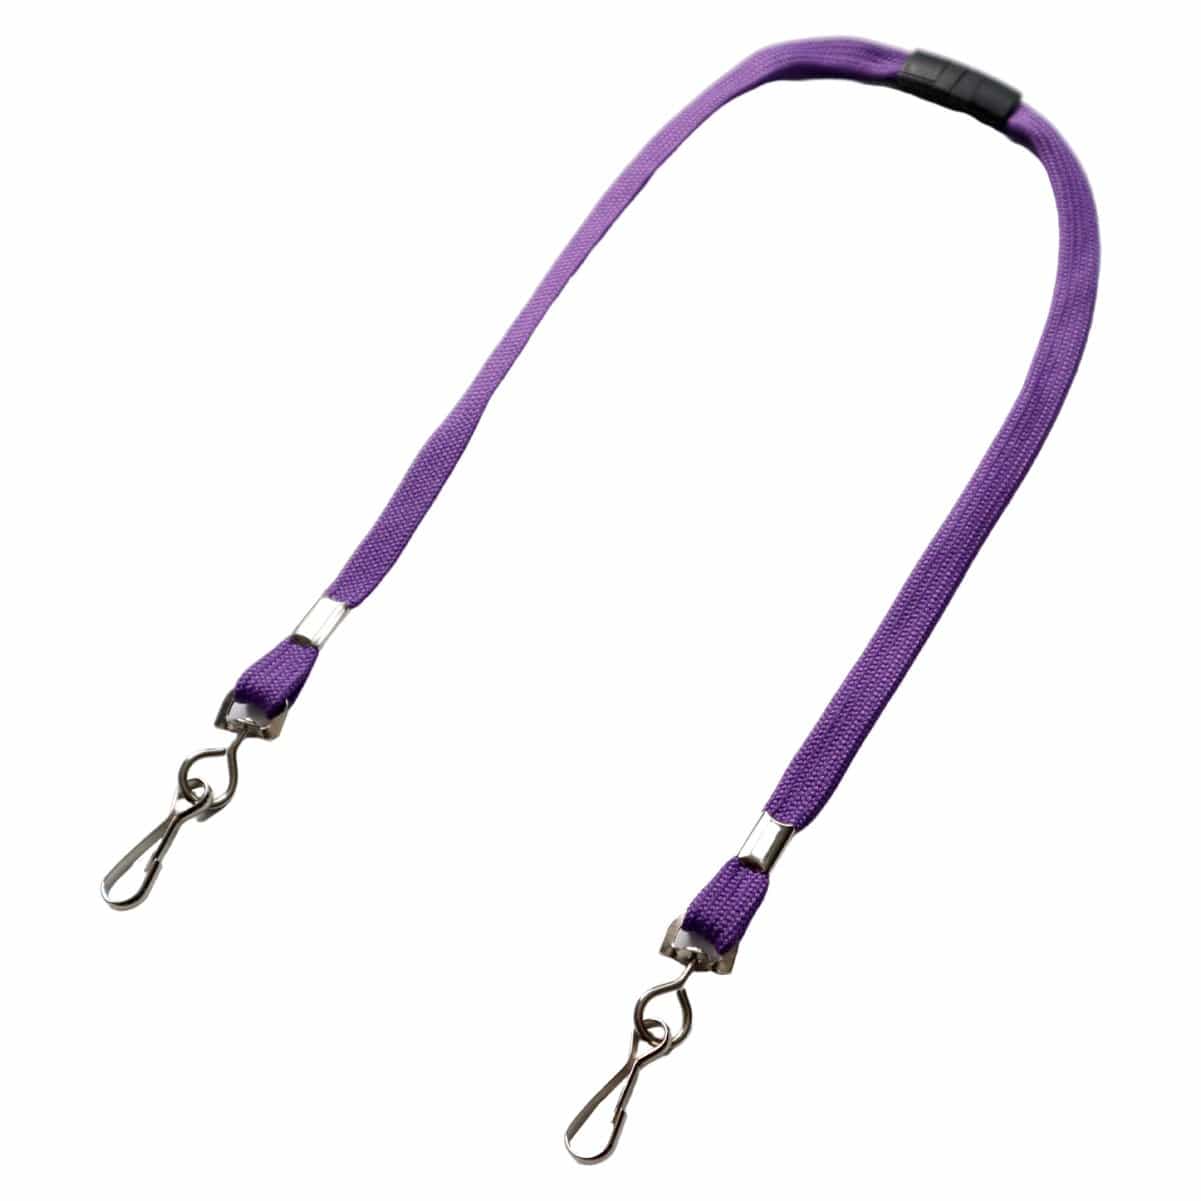 Purple Kids Face Mask Lanyard / Hanger with Safety Breakaway Clasp - Short Length for Childrens Facemasks SPID-2330-PURPLE